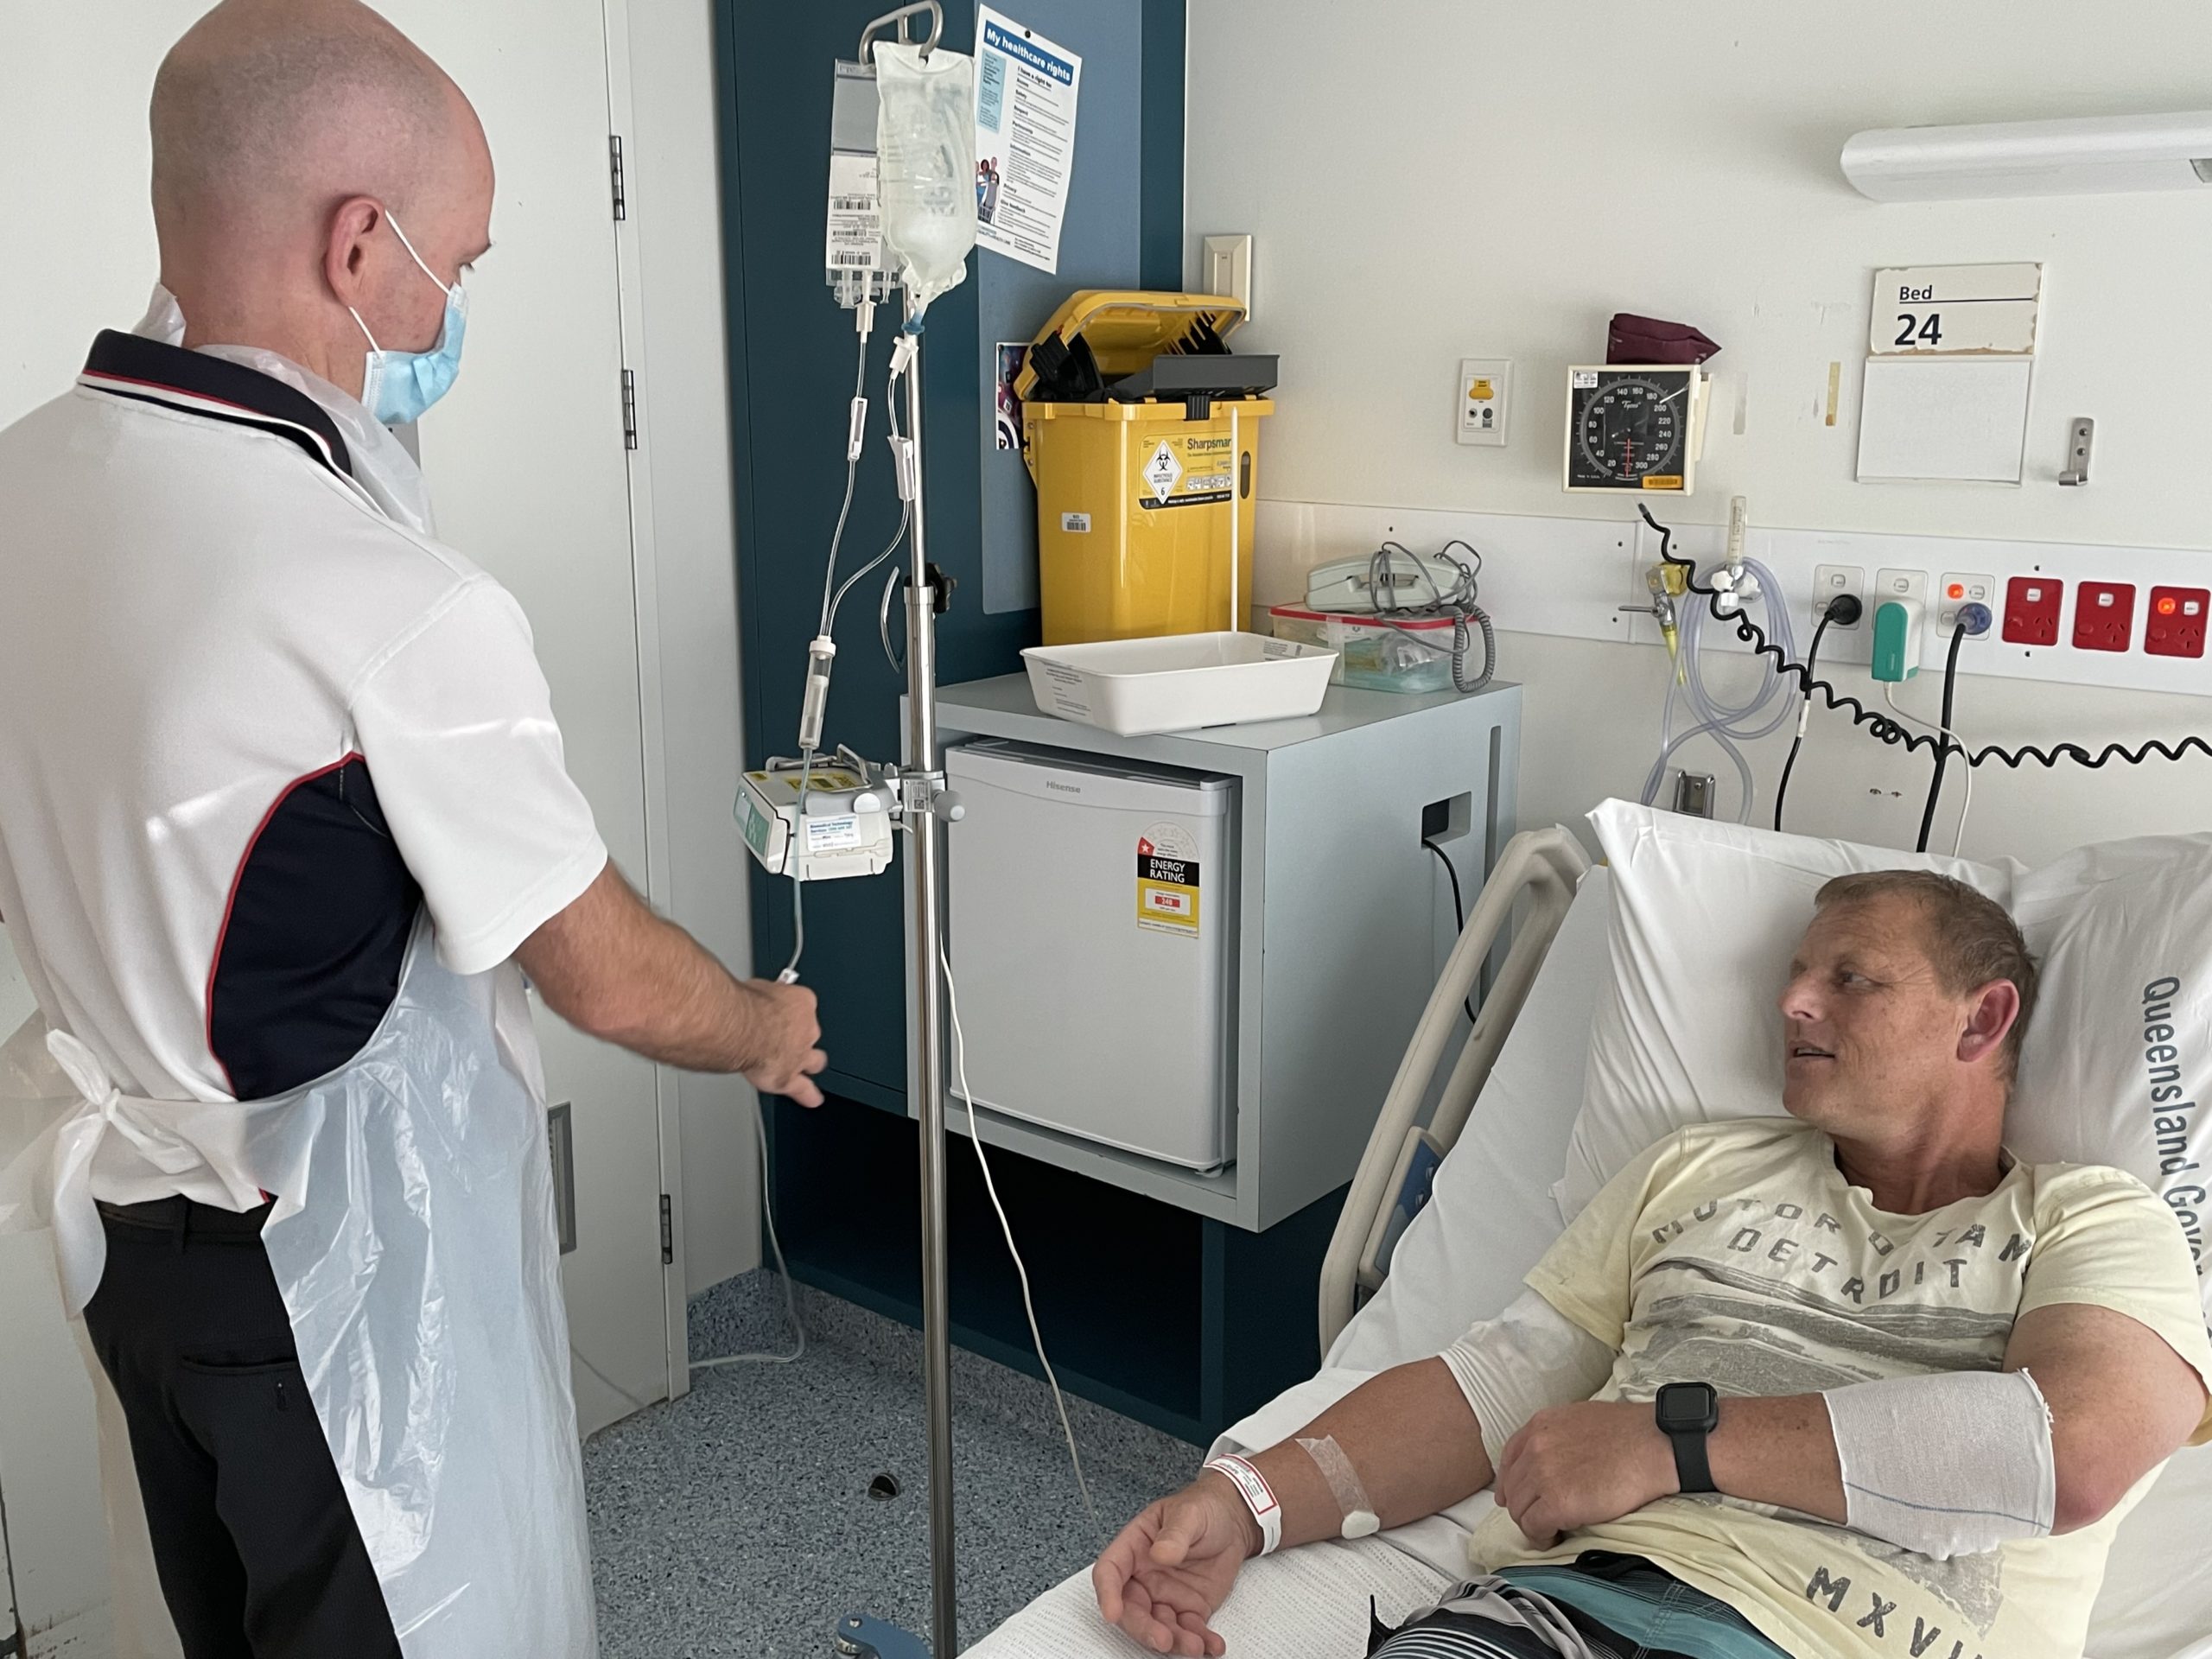 Graeme lies in a hospital bed while a nurse connects an IV line to him